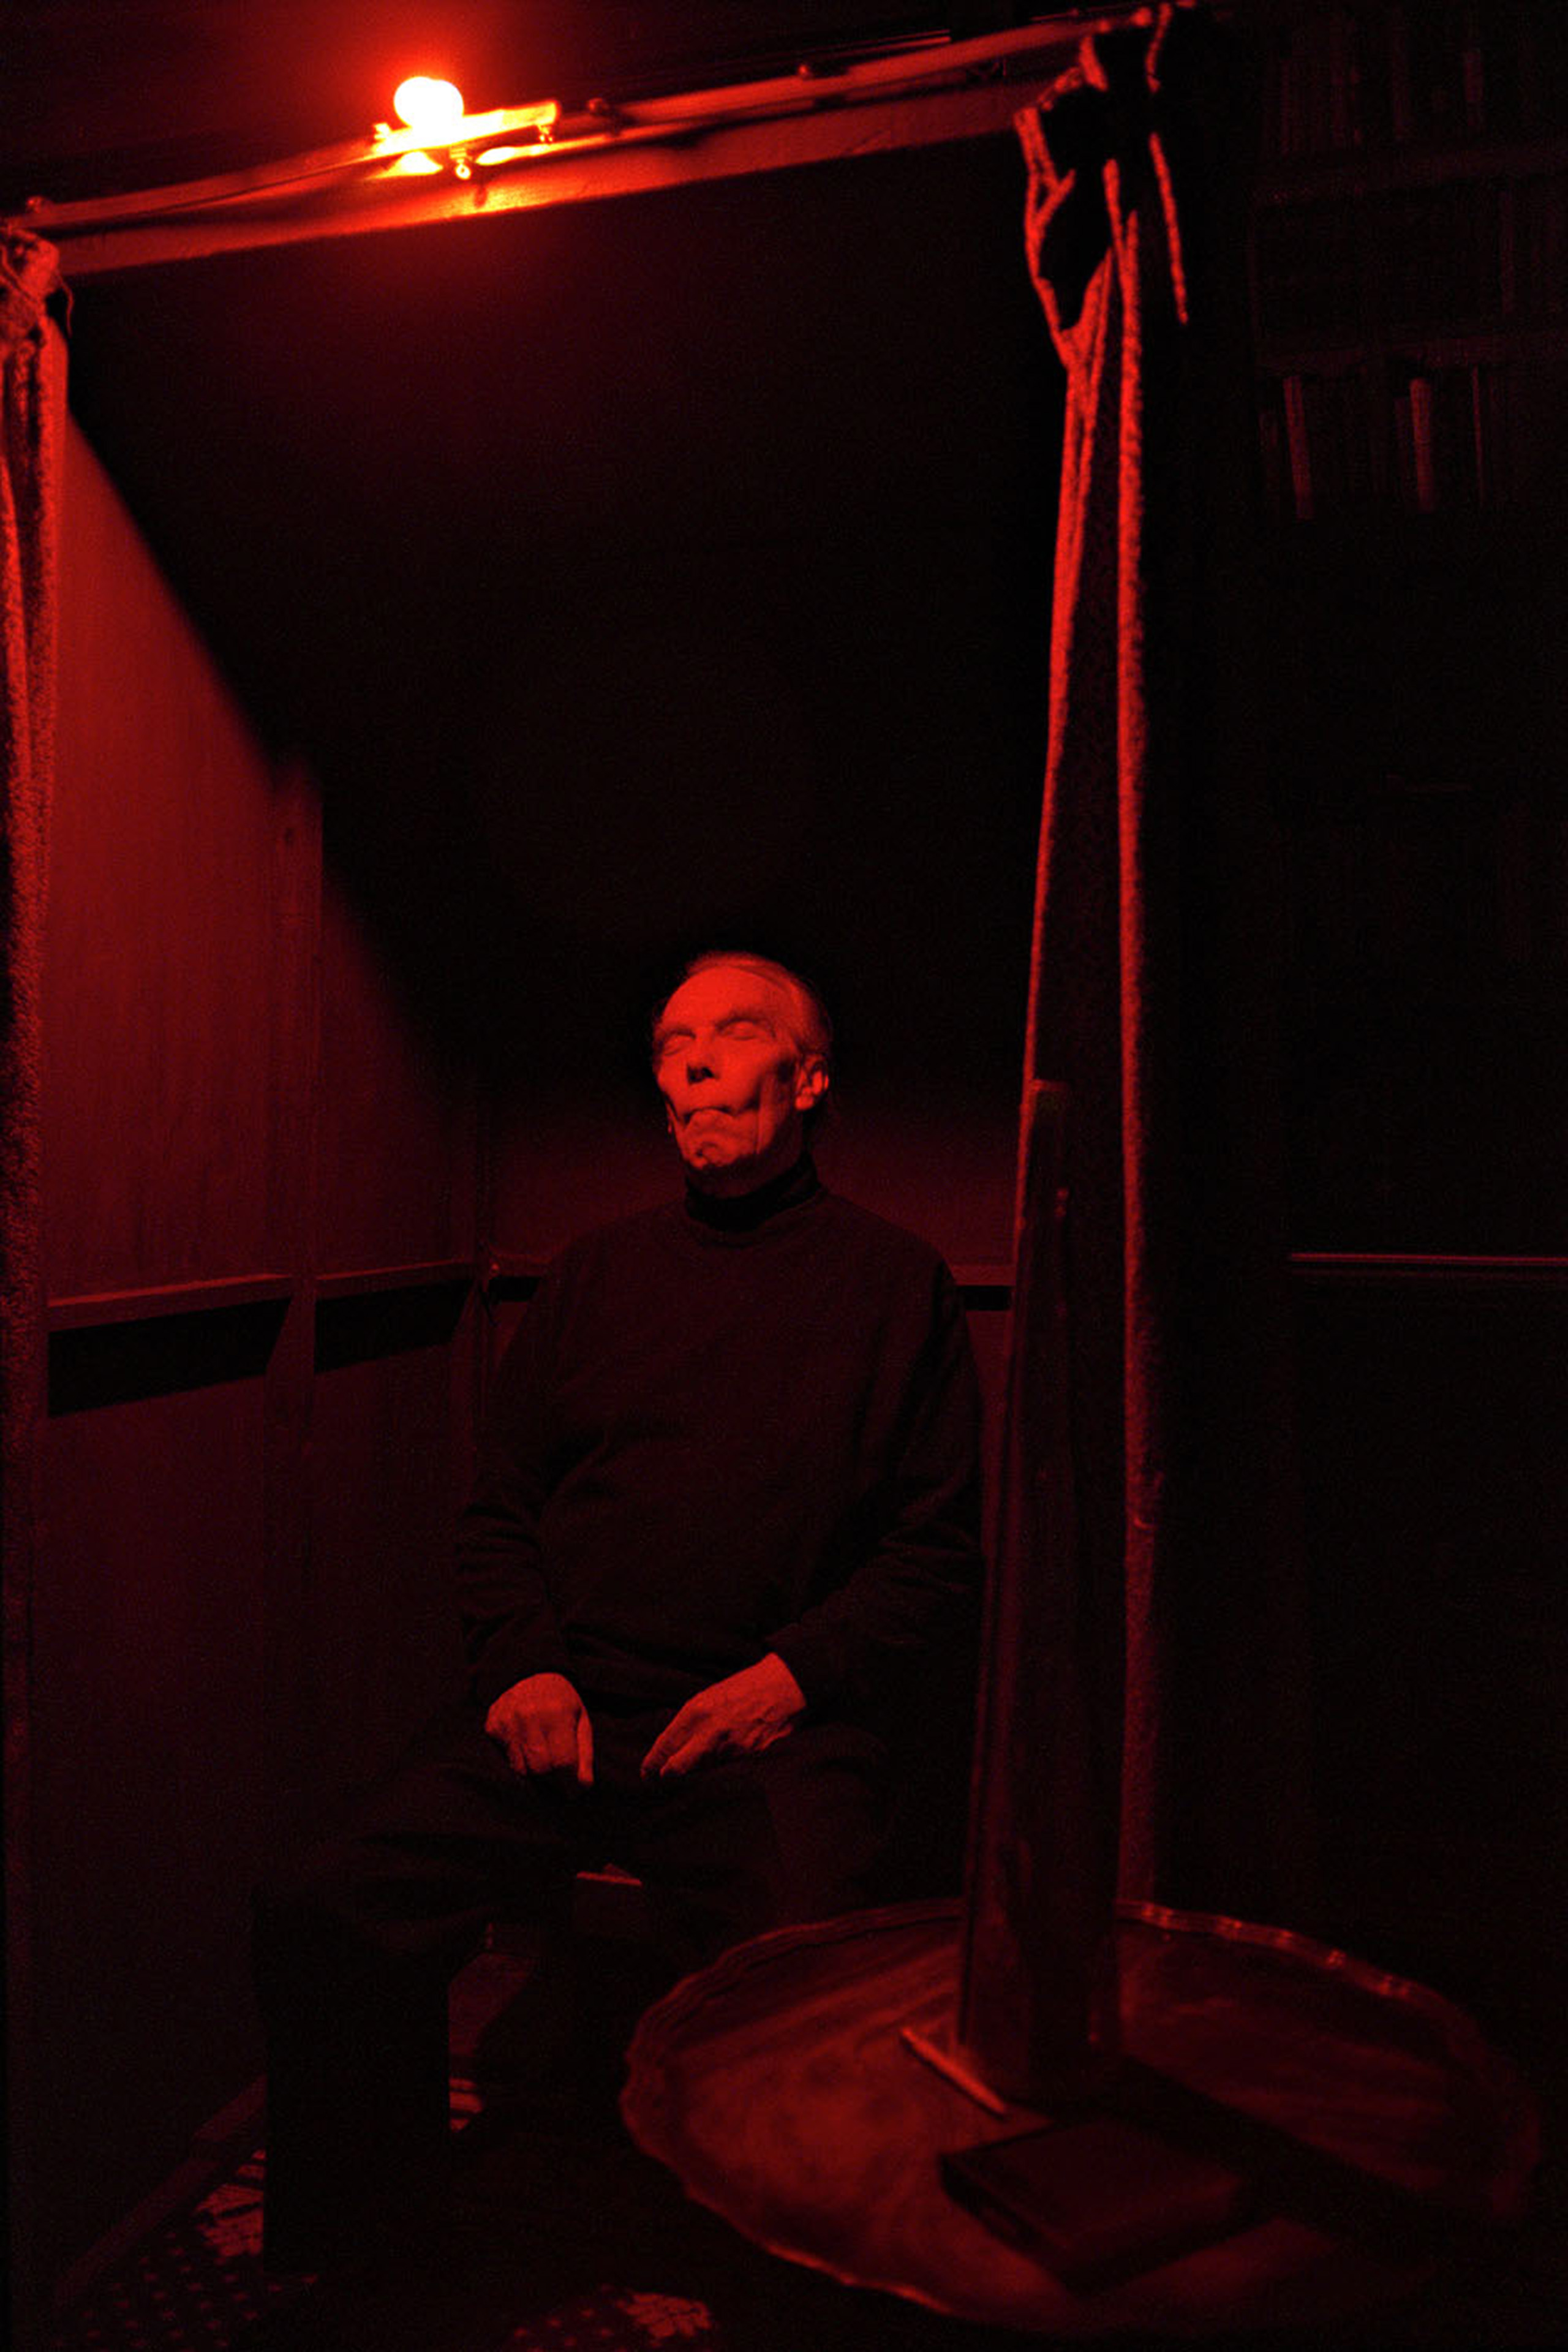 Brian in the medium's cabinet, Arthur Findlay College, Stansted, England, 2003.